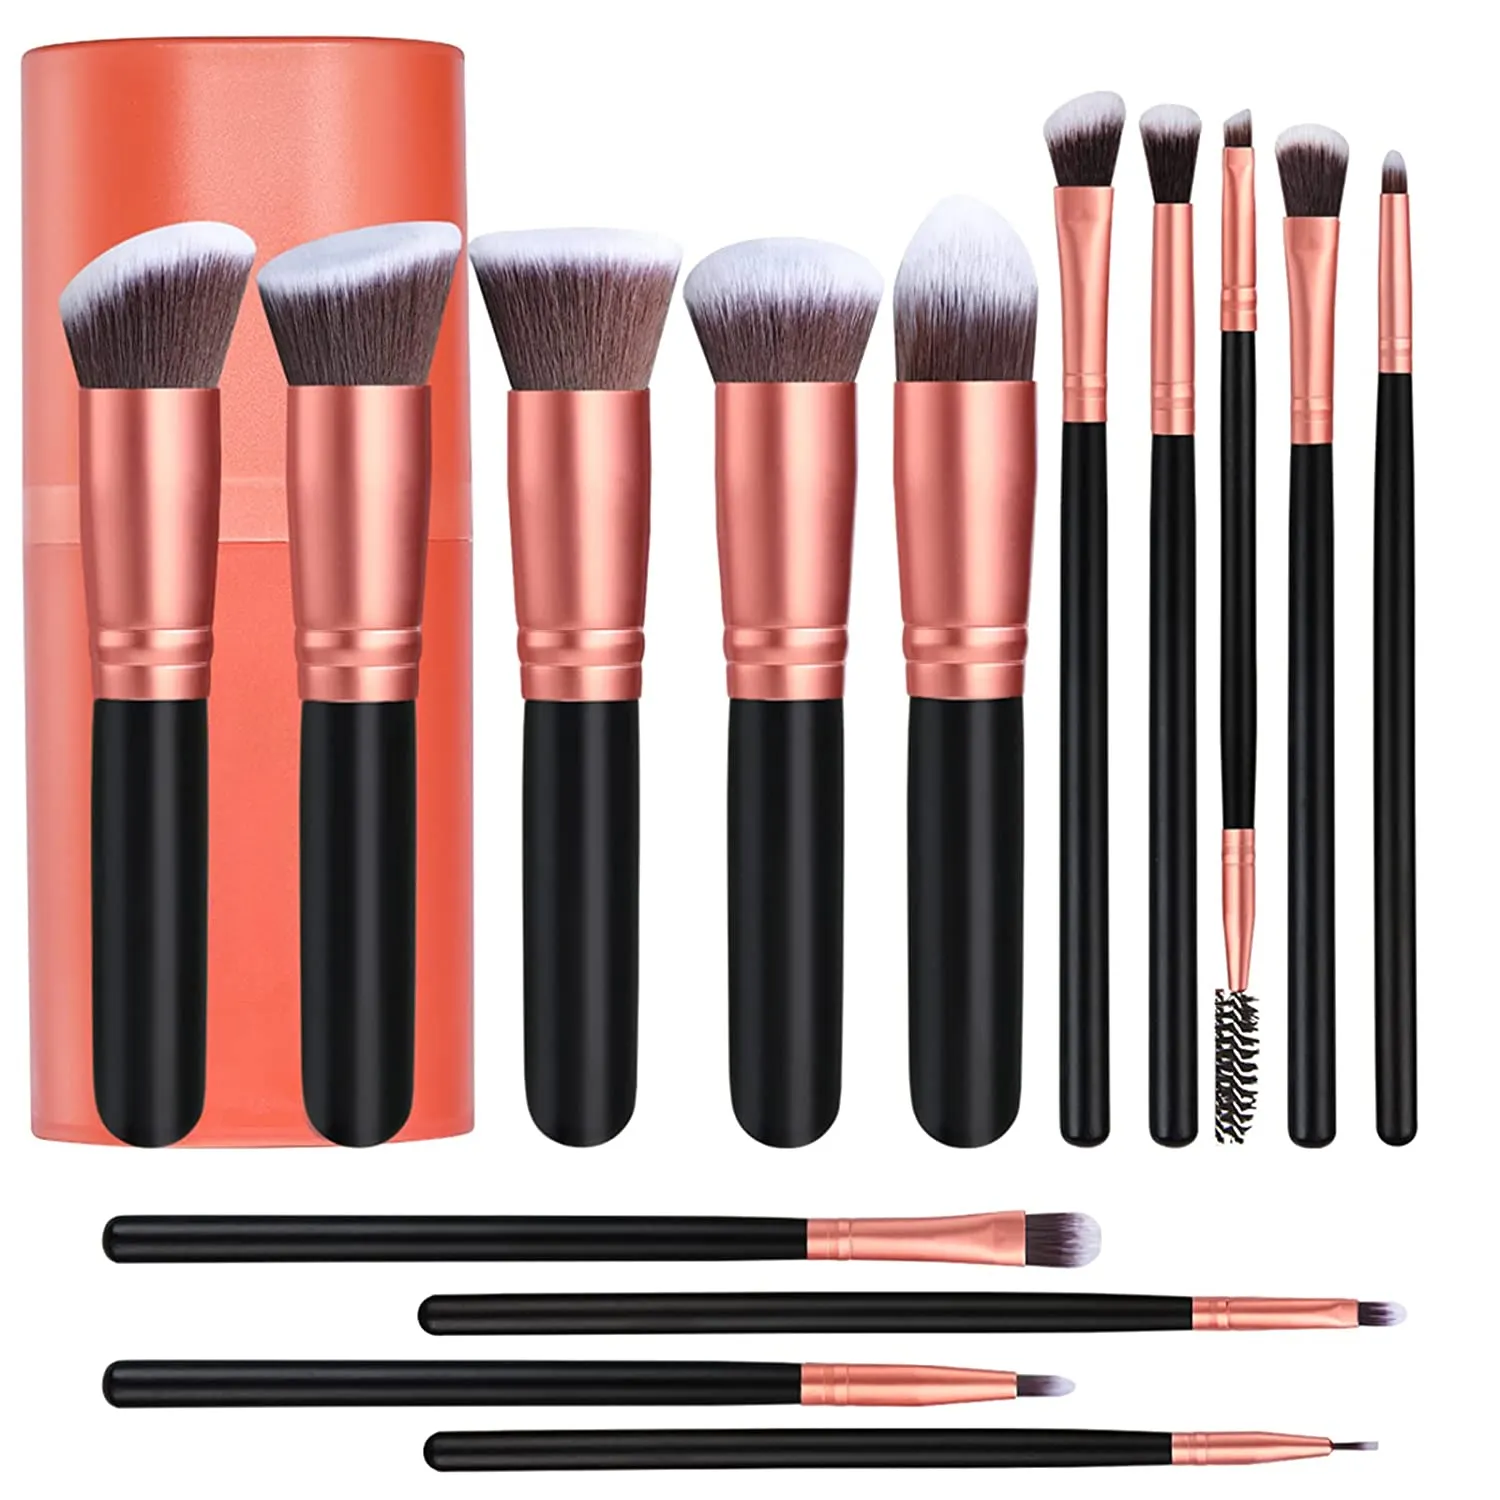 Hot Sale 14 pcs Rose Gold Synthetic Cosmetic Make Up Brush OEM available Wooden Handle Makeup Brushes Set brocha de maquillaje